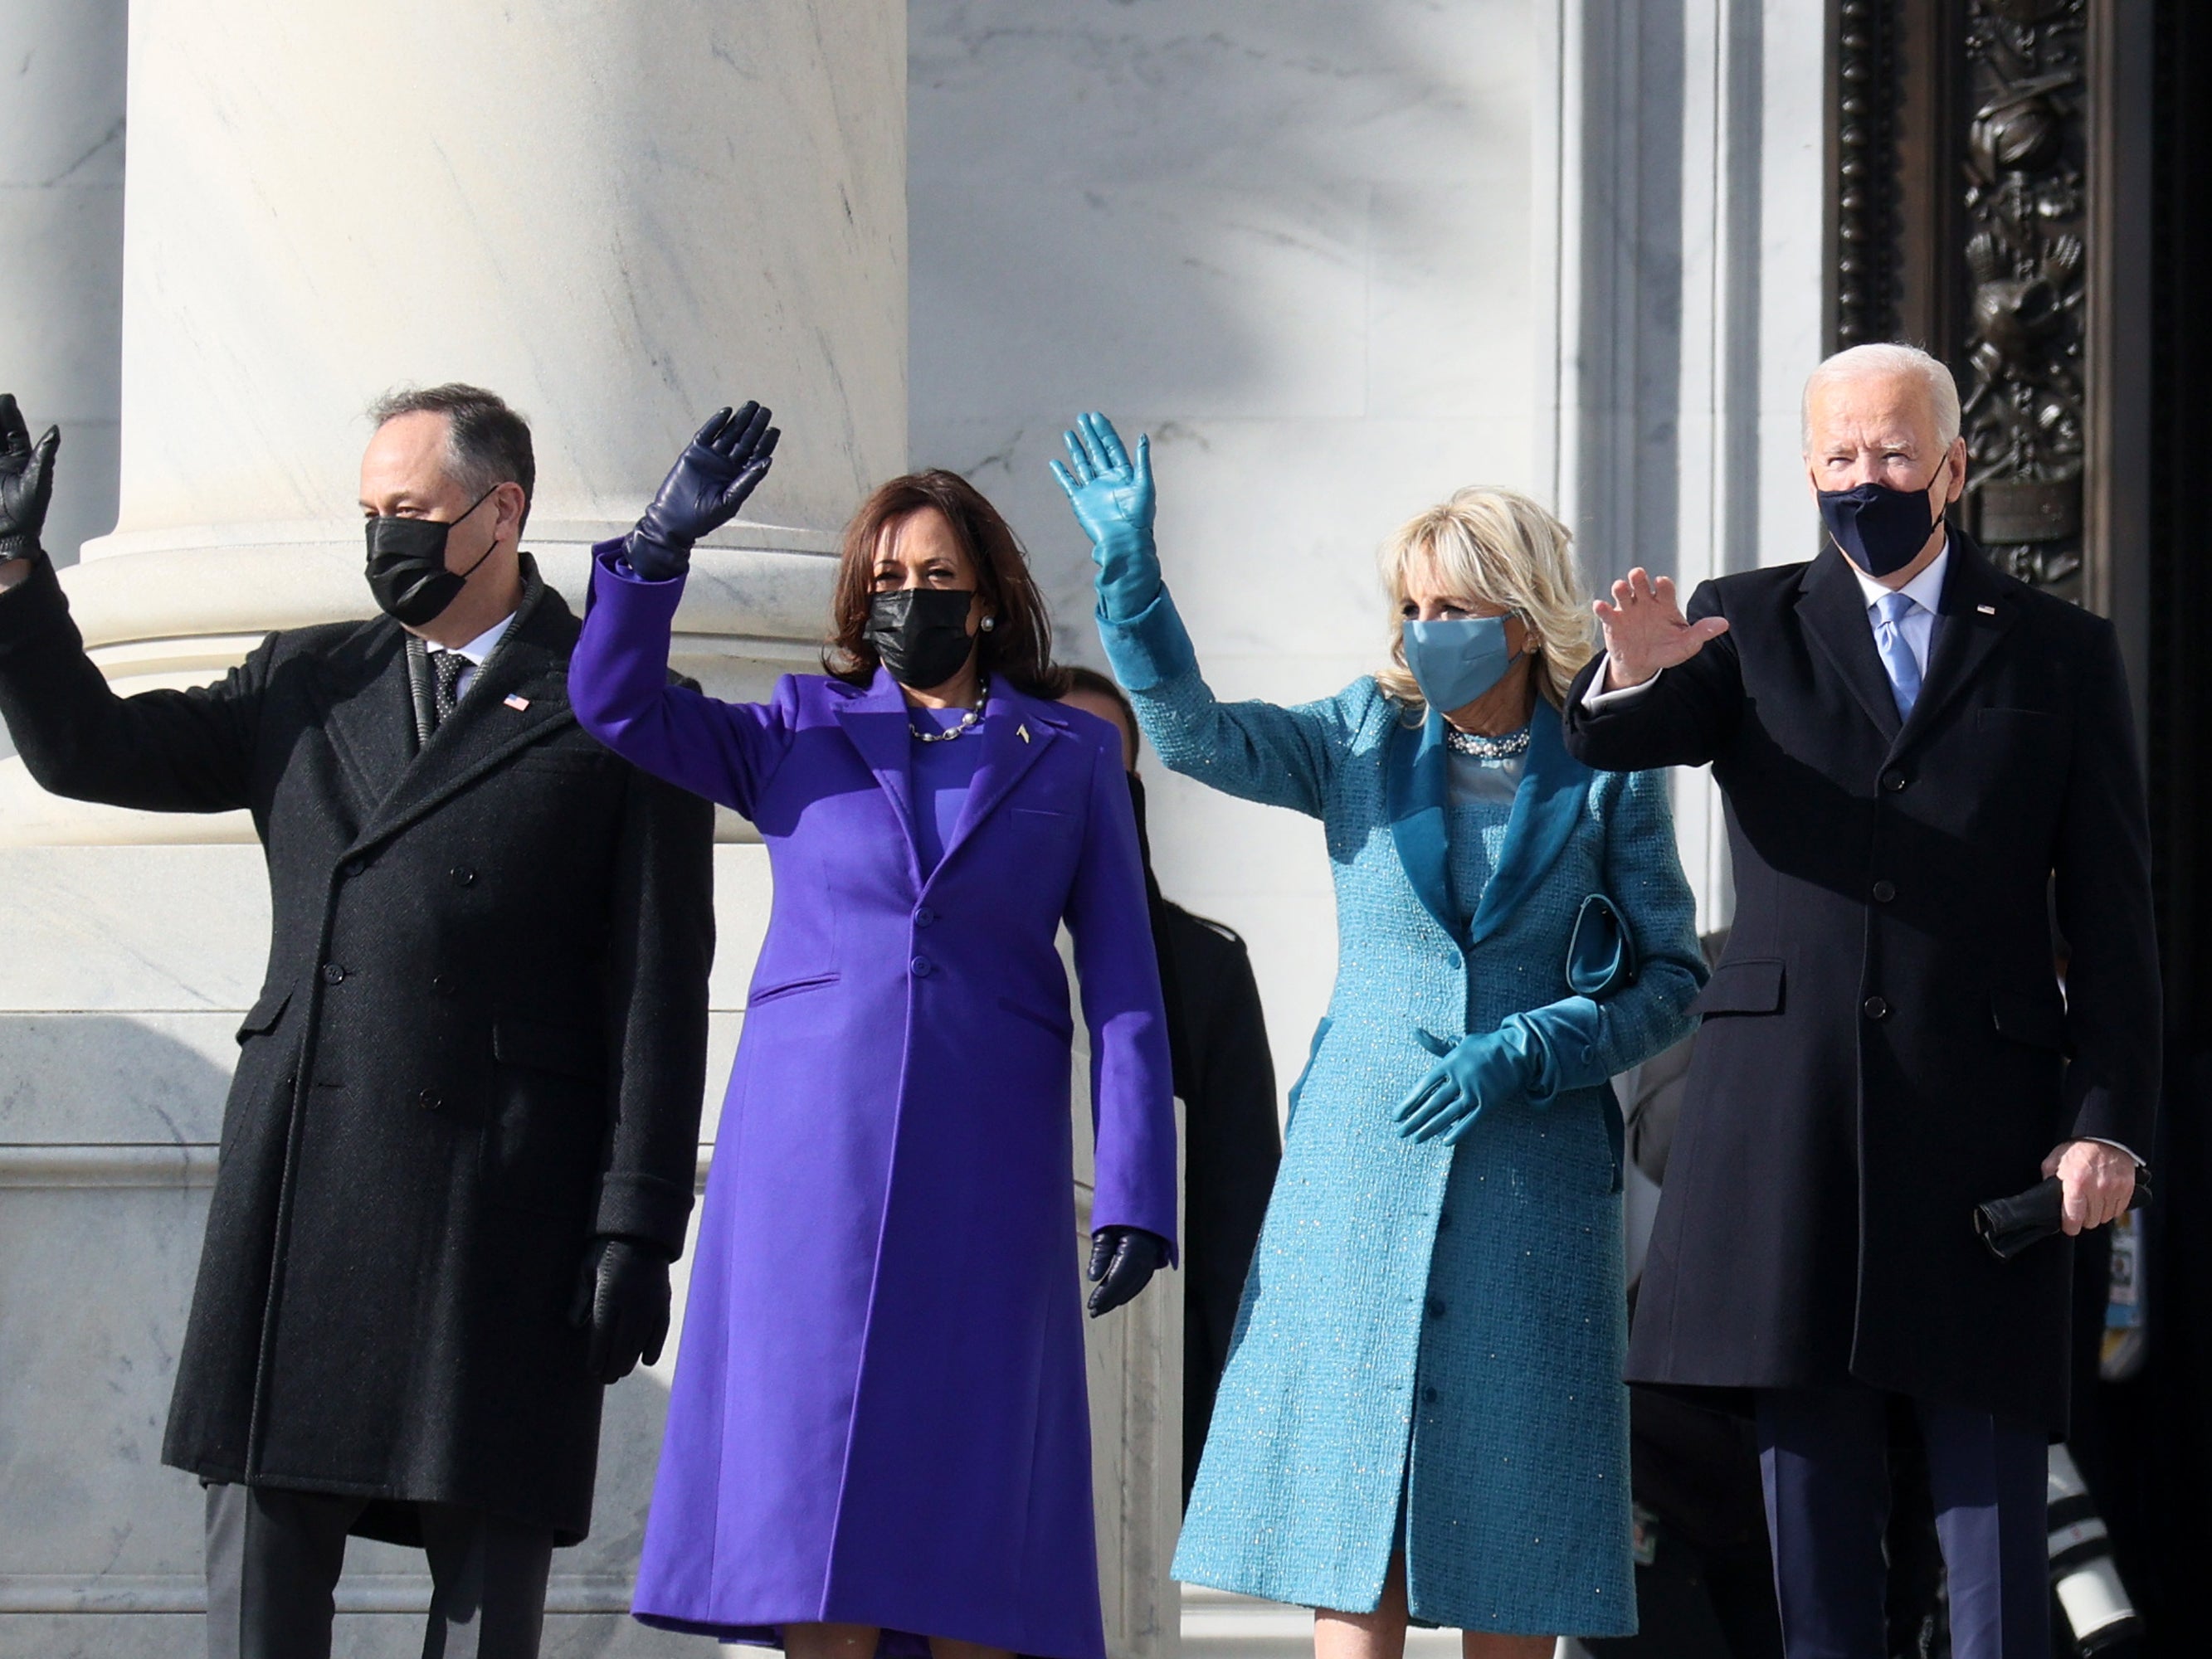 Joe Biden, Kamala Harris, Jill Biden, and Doug Emhoff wave as they arrive on the East Front of the Capitol for the inauguration ceremony